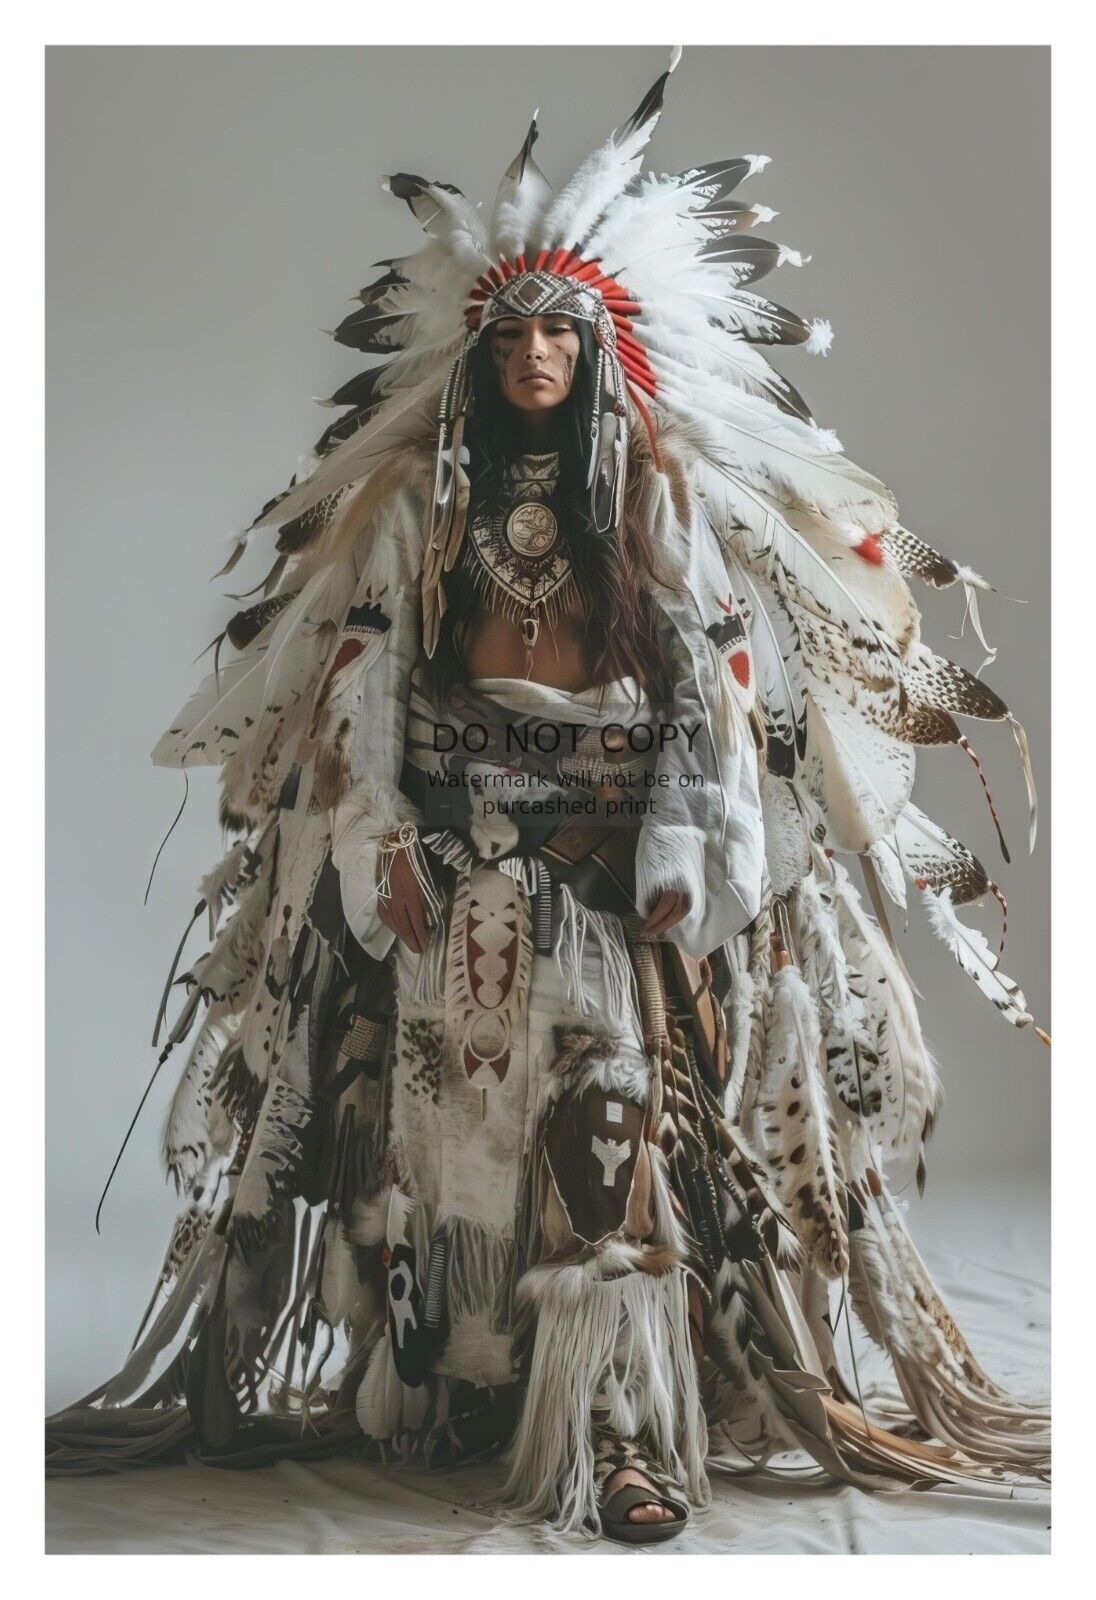 GORGEOUS YOUNG NATIVE AMERICAN LADY WEARING FEATHER CLOTHING 4X6 FANTASY PHOTO